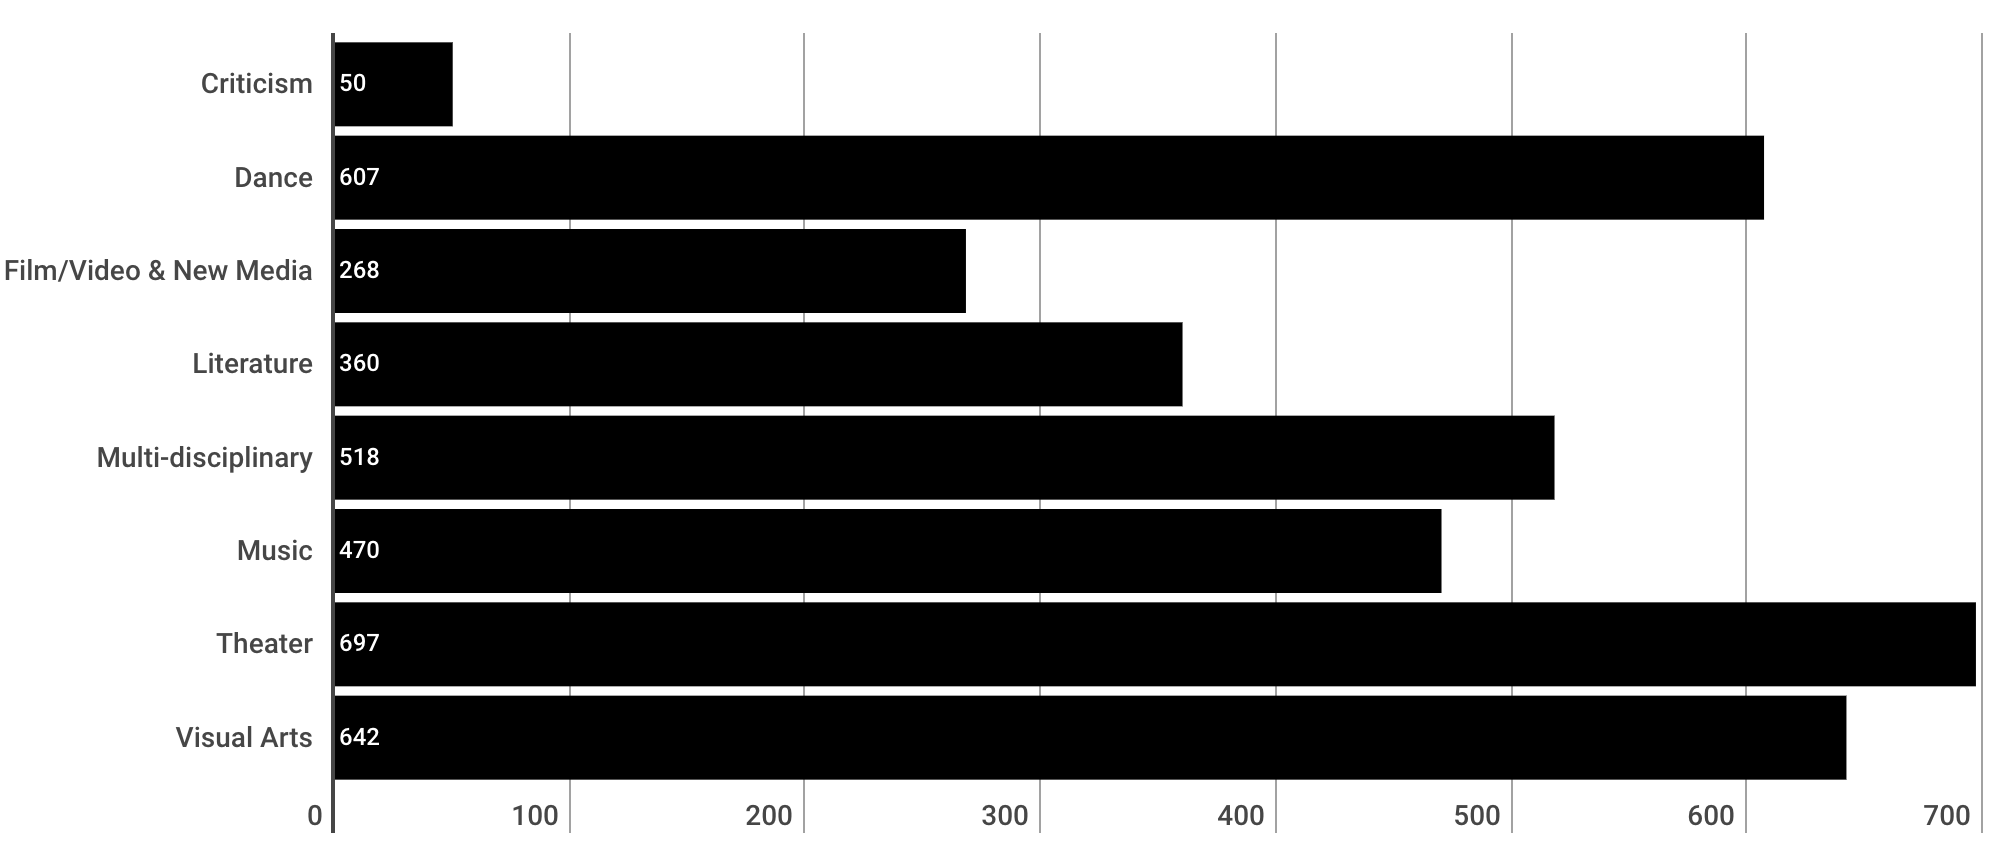 A Bar Chart Showing the Number of Grants Made in Each Artistic Field